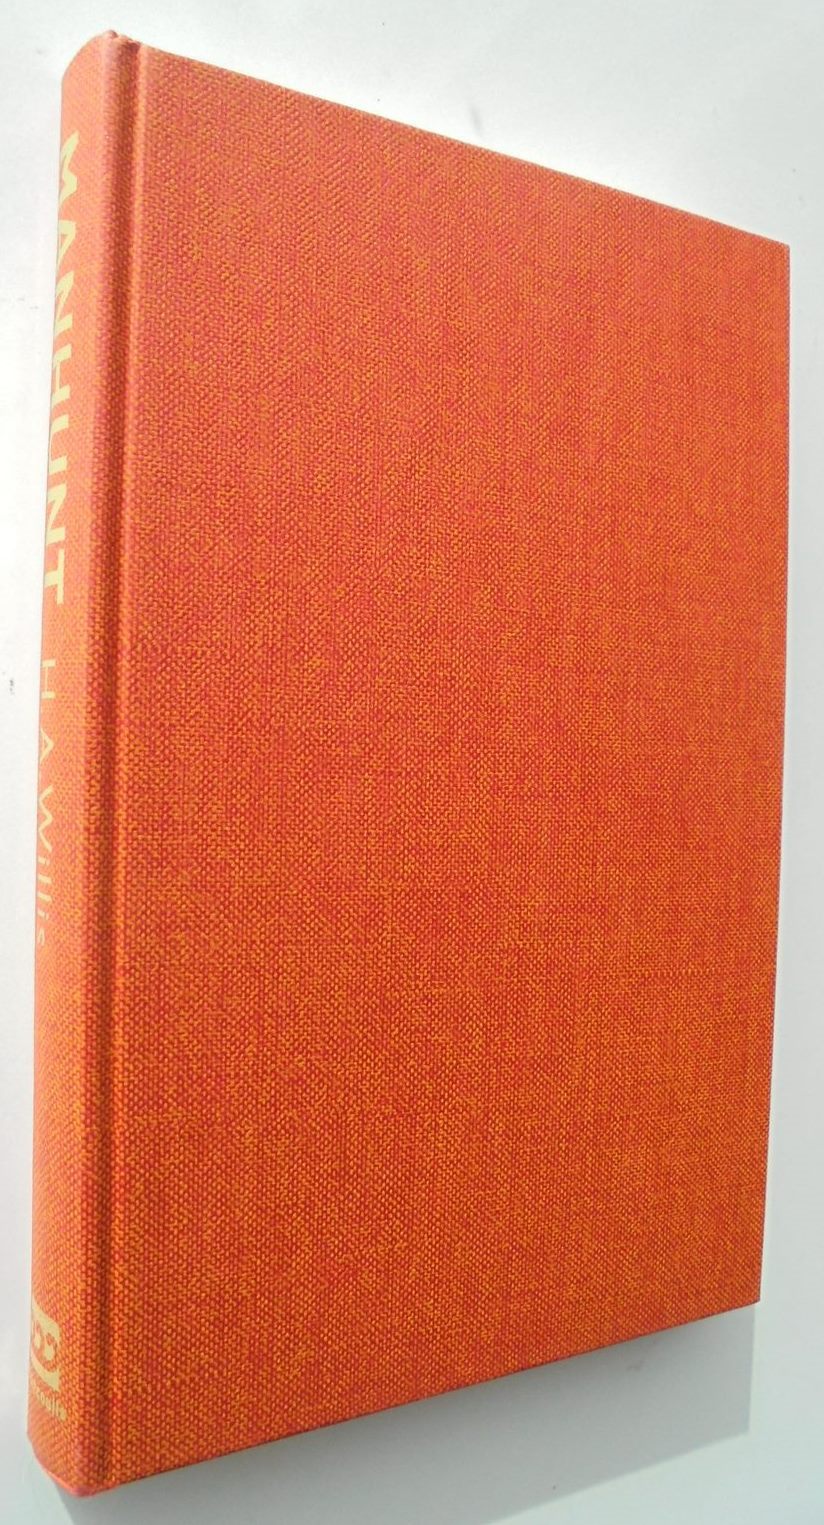 Manhunt The Story of Stanley Graham By H.A. Willis.